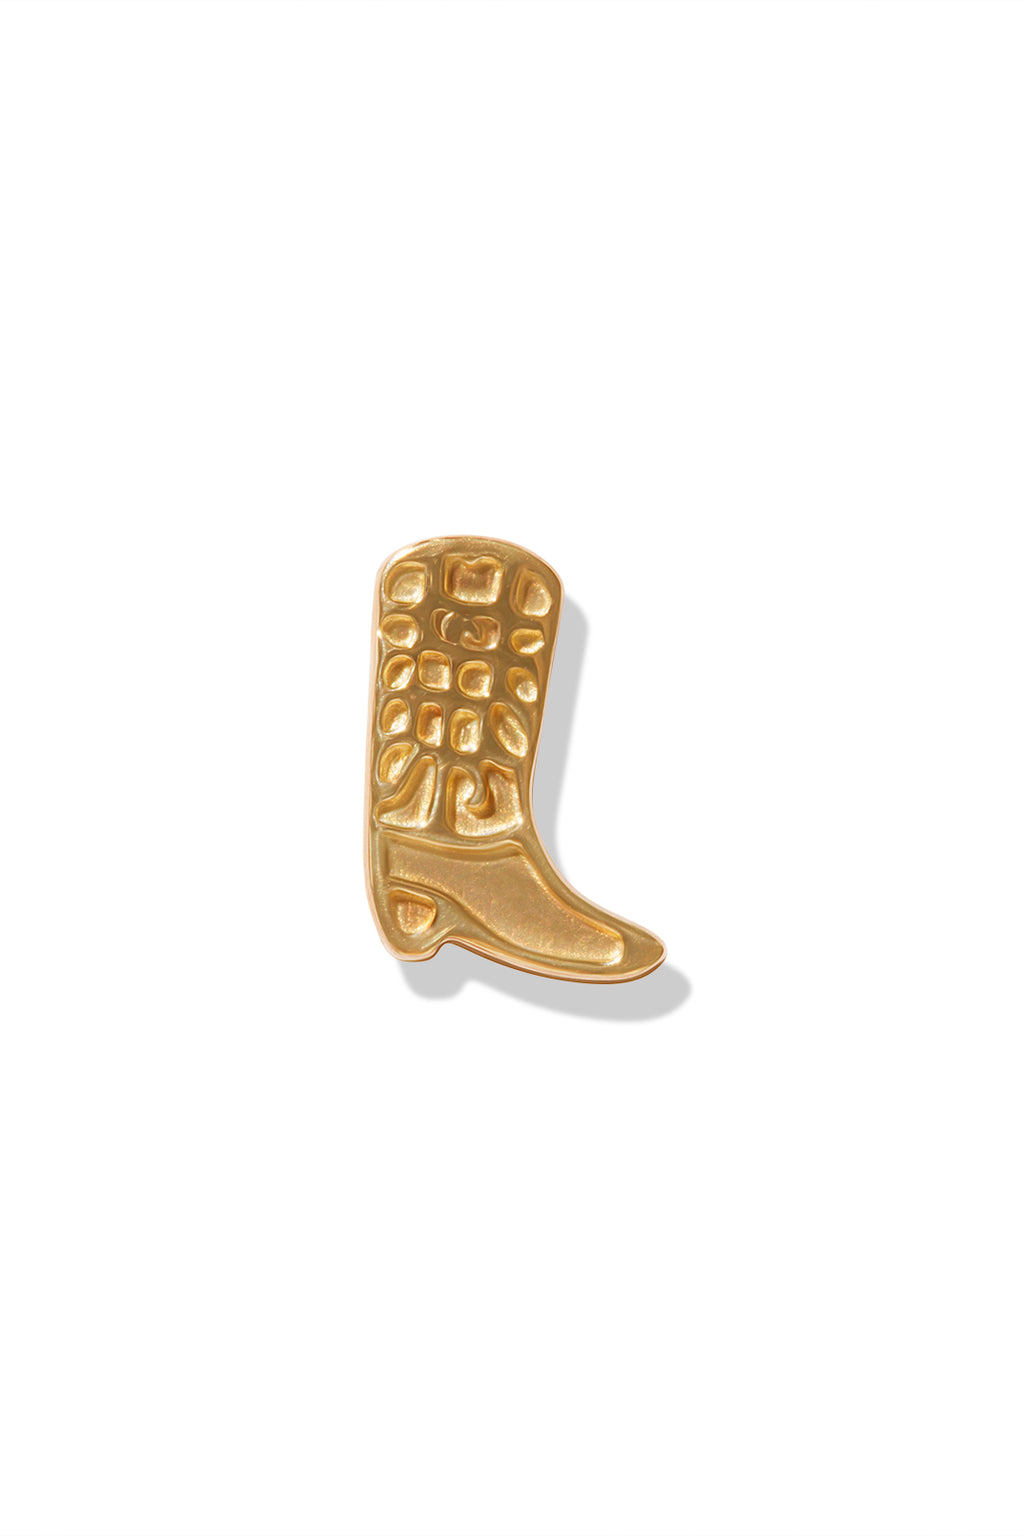 14K yellow gold stud shaped like a cowboy boot with a textured design on the upper part.